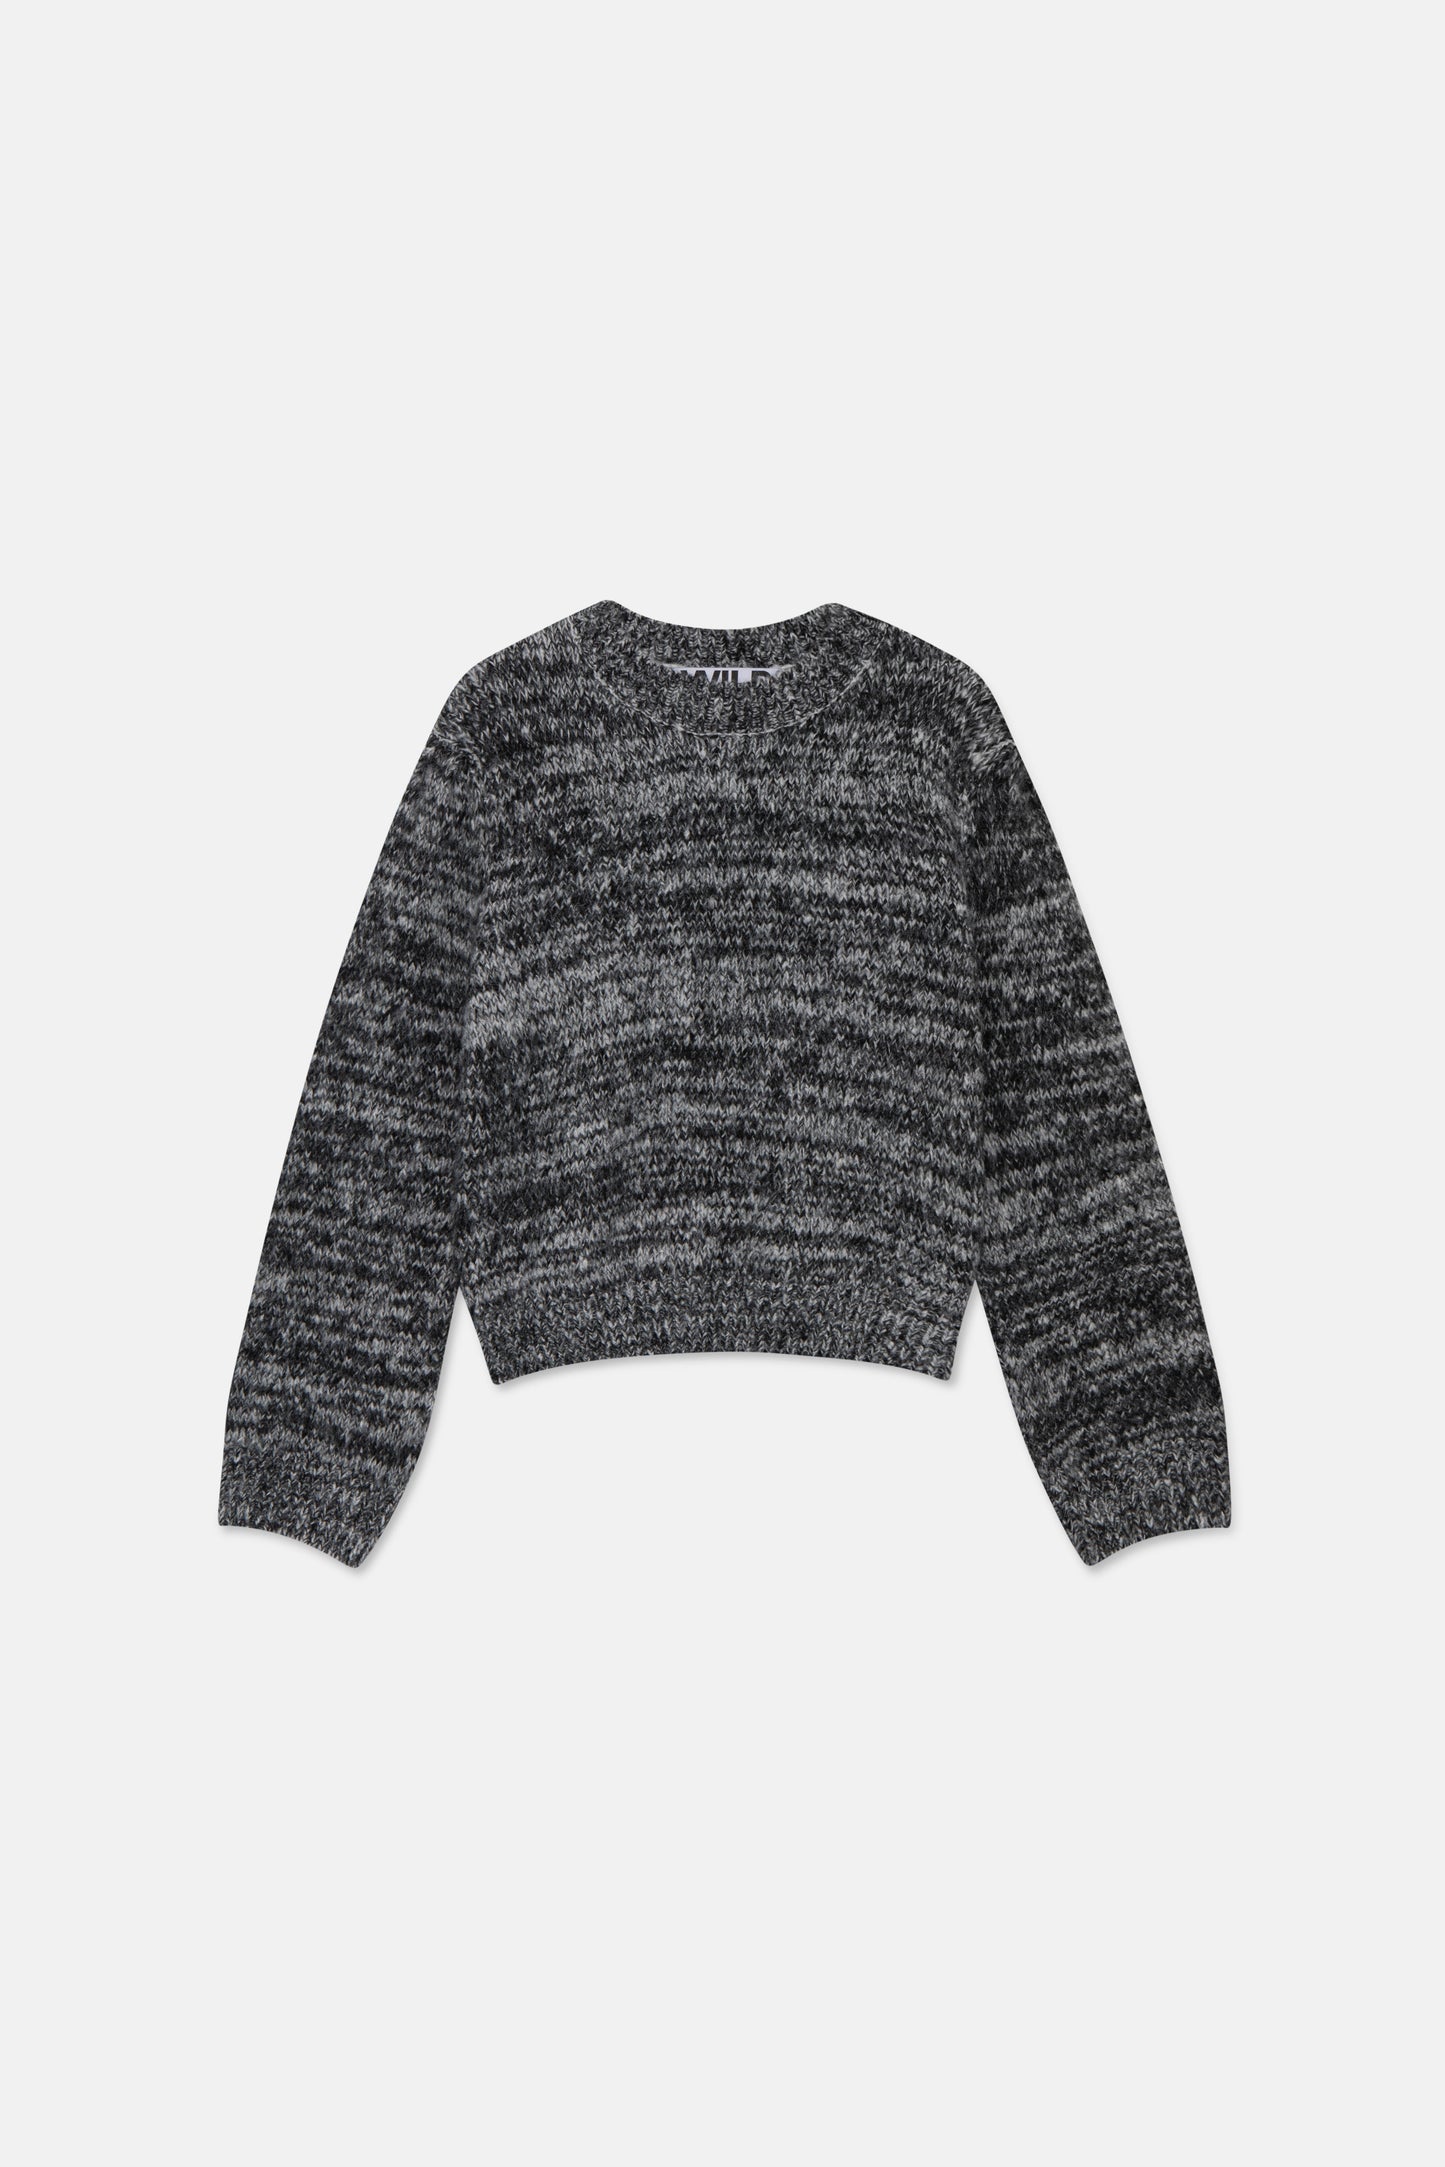 Gray Textured Knit Sweater